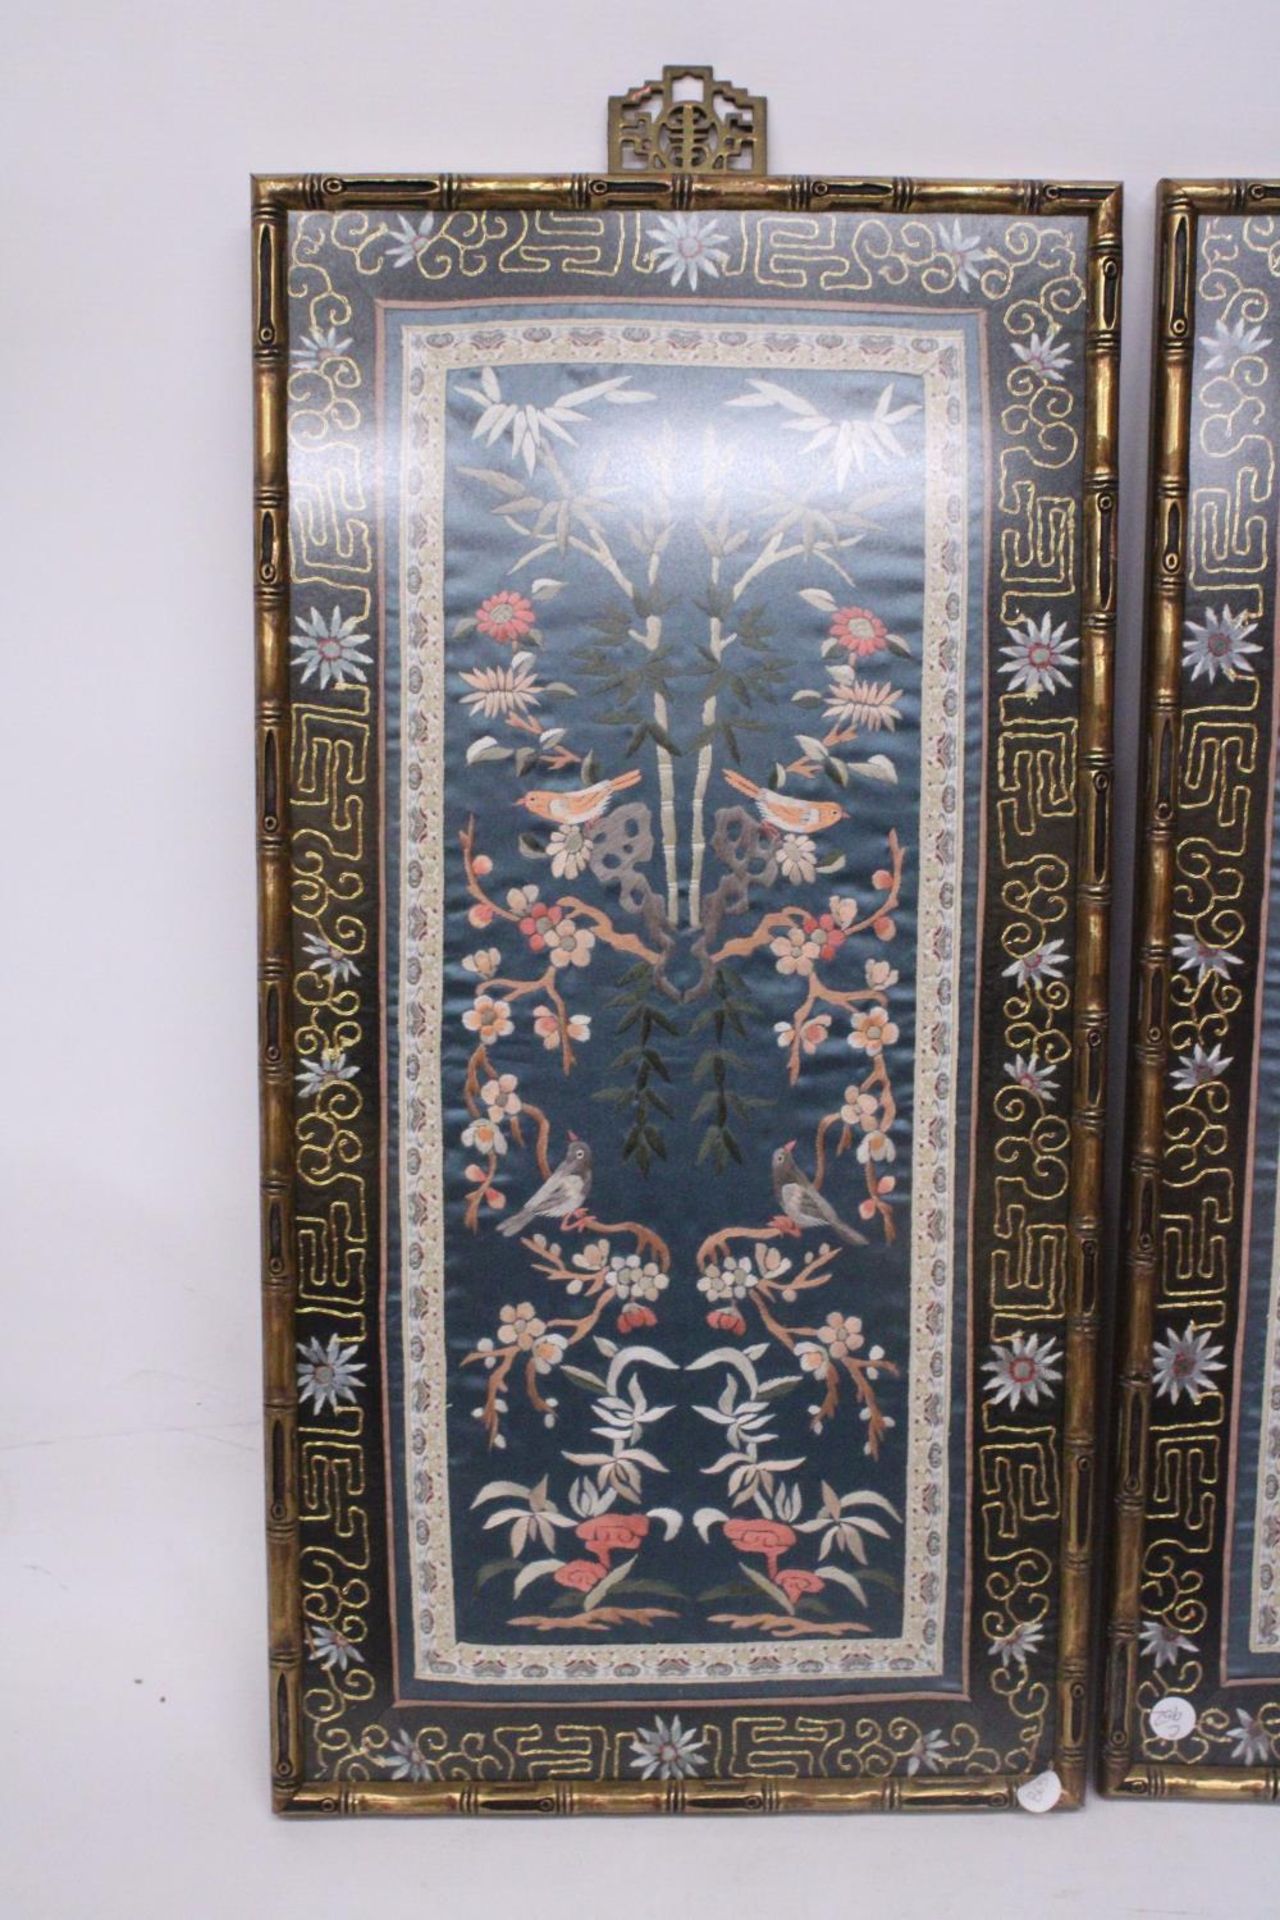 THREE CHINESE SILK EMBROIDERIES DEPICTING A LANDSCAPE SCENE, BIRDS AND FLORALS IN BAMBOO FRAMES - Image 4 of 7